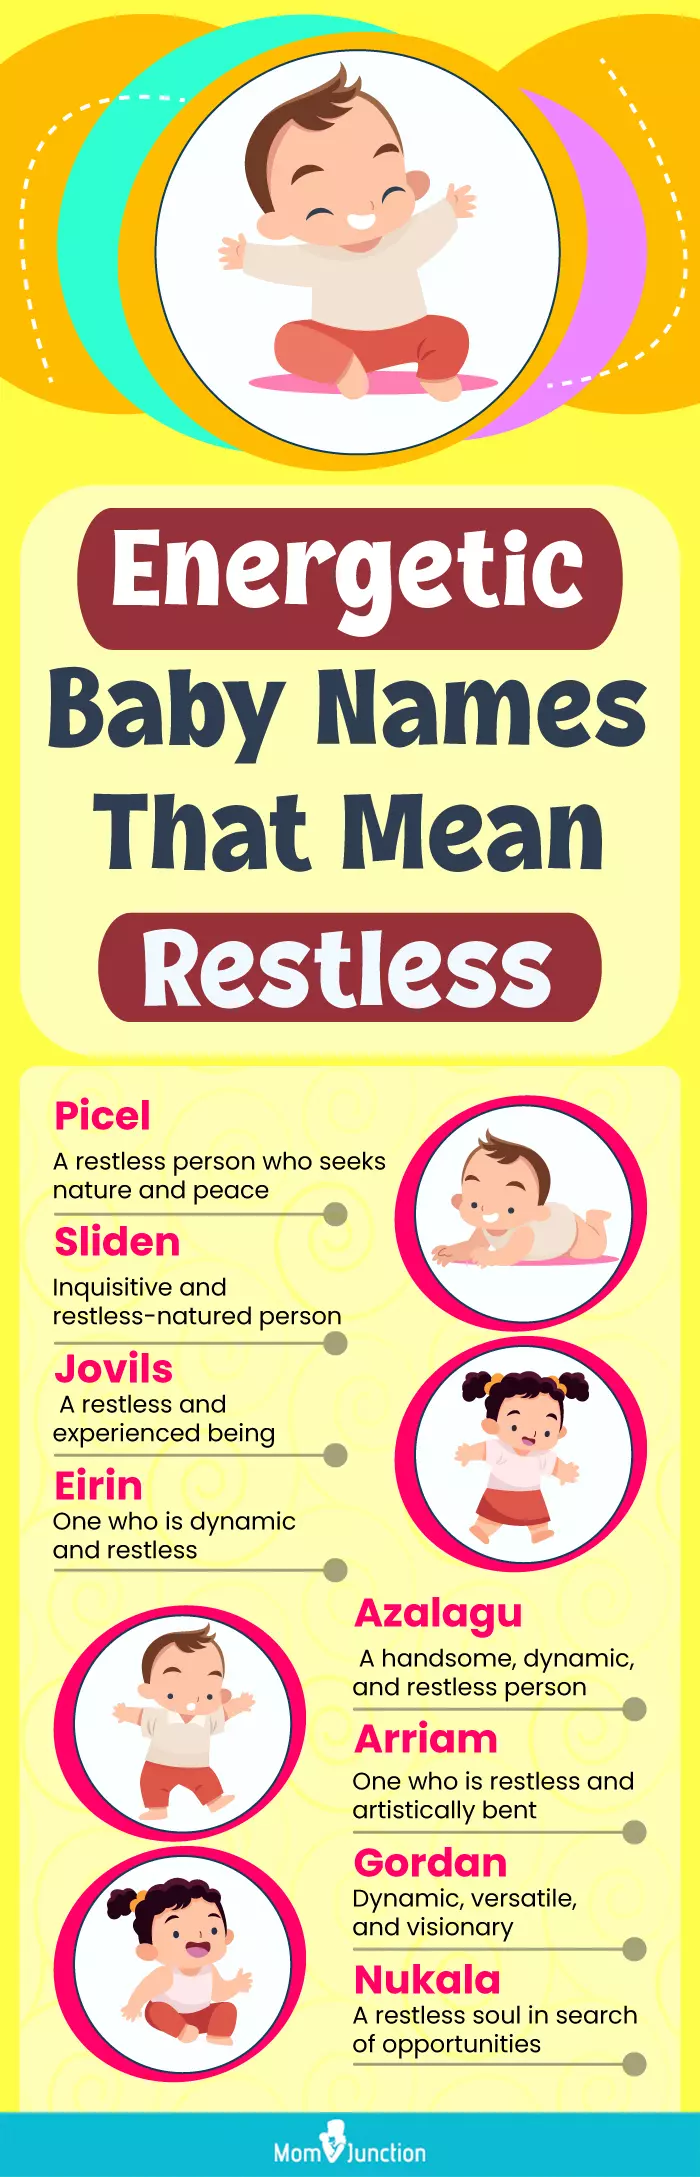 energetic baby names that mean restless (infographic)